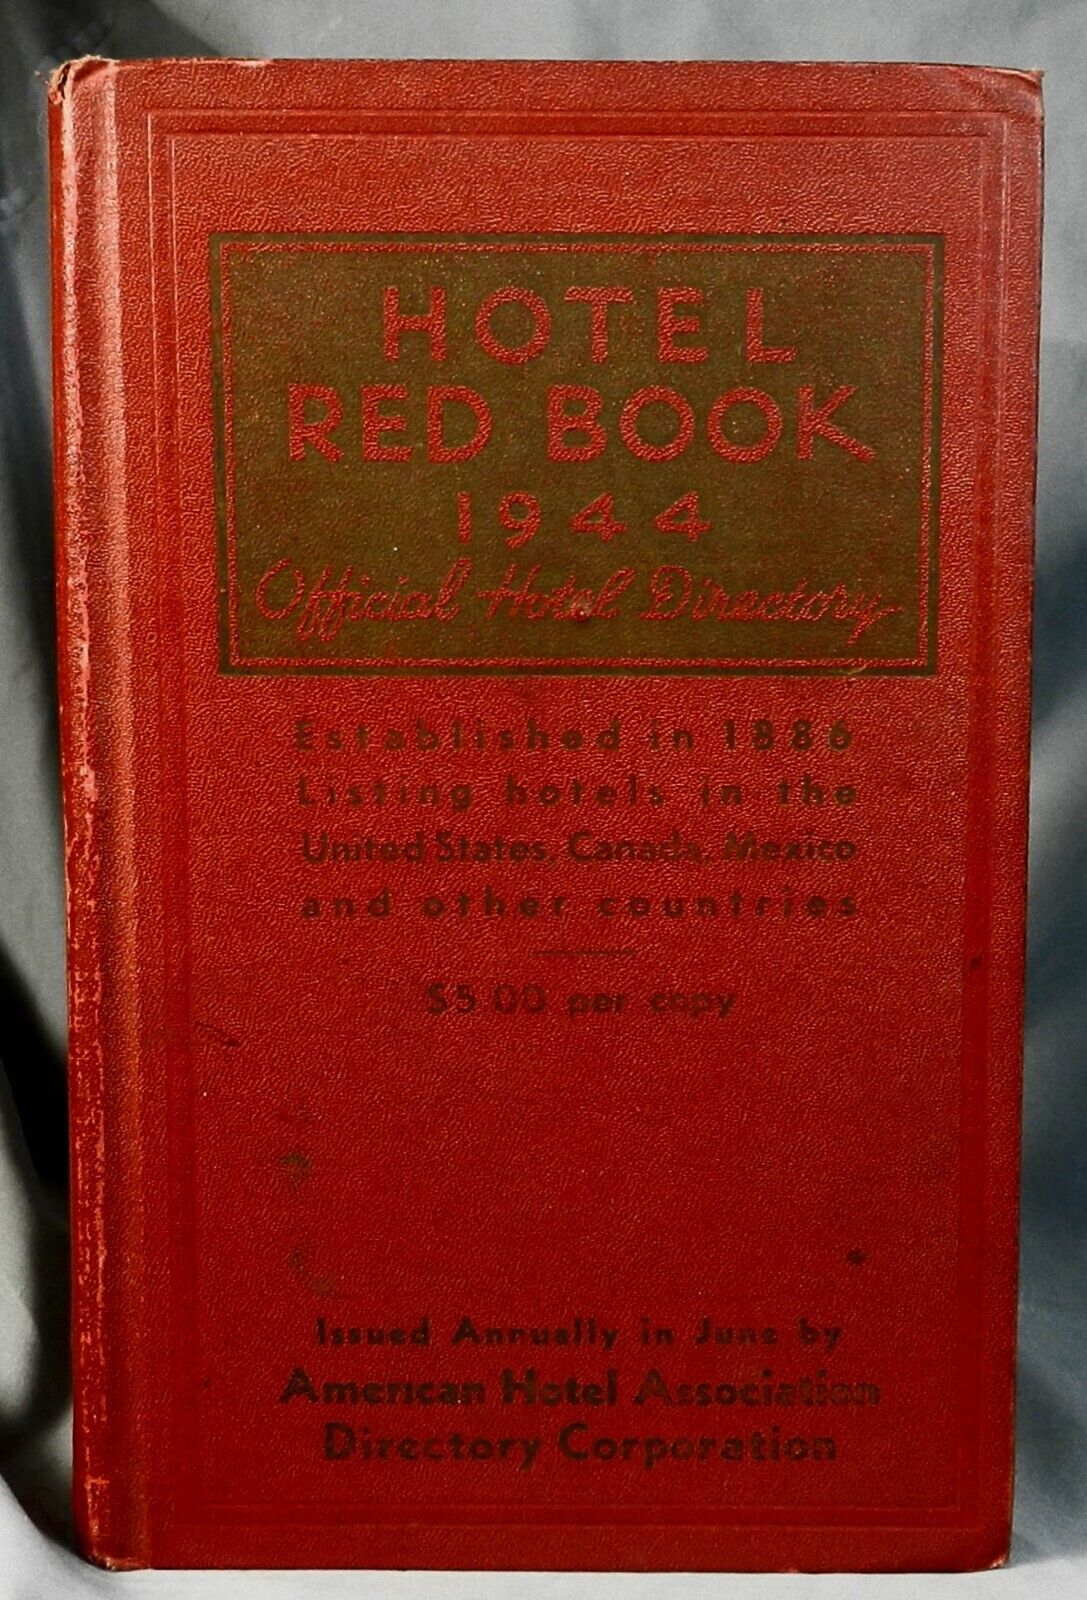 Hotel Red Book 1944 - Mid Century Architecture - Amazing Prices - Scarce